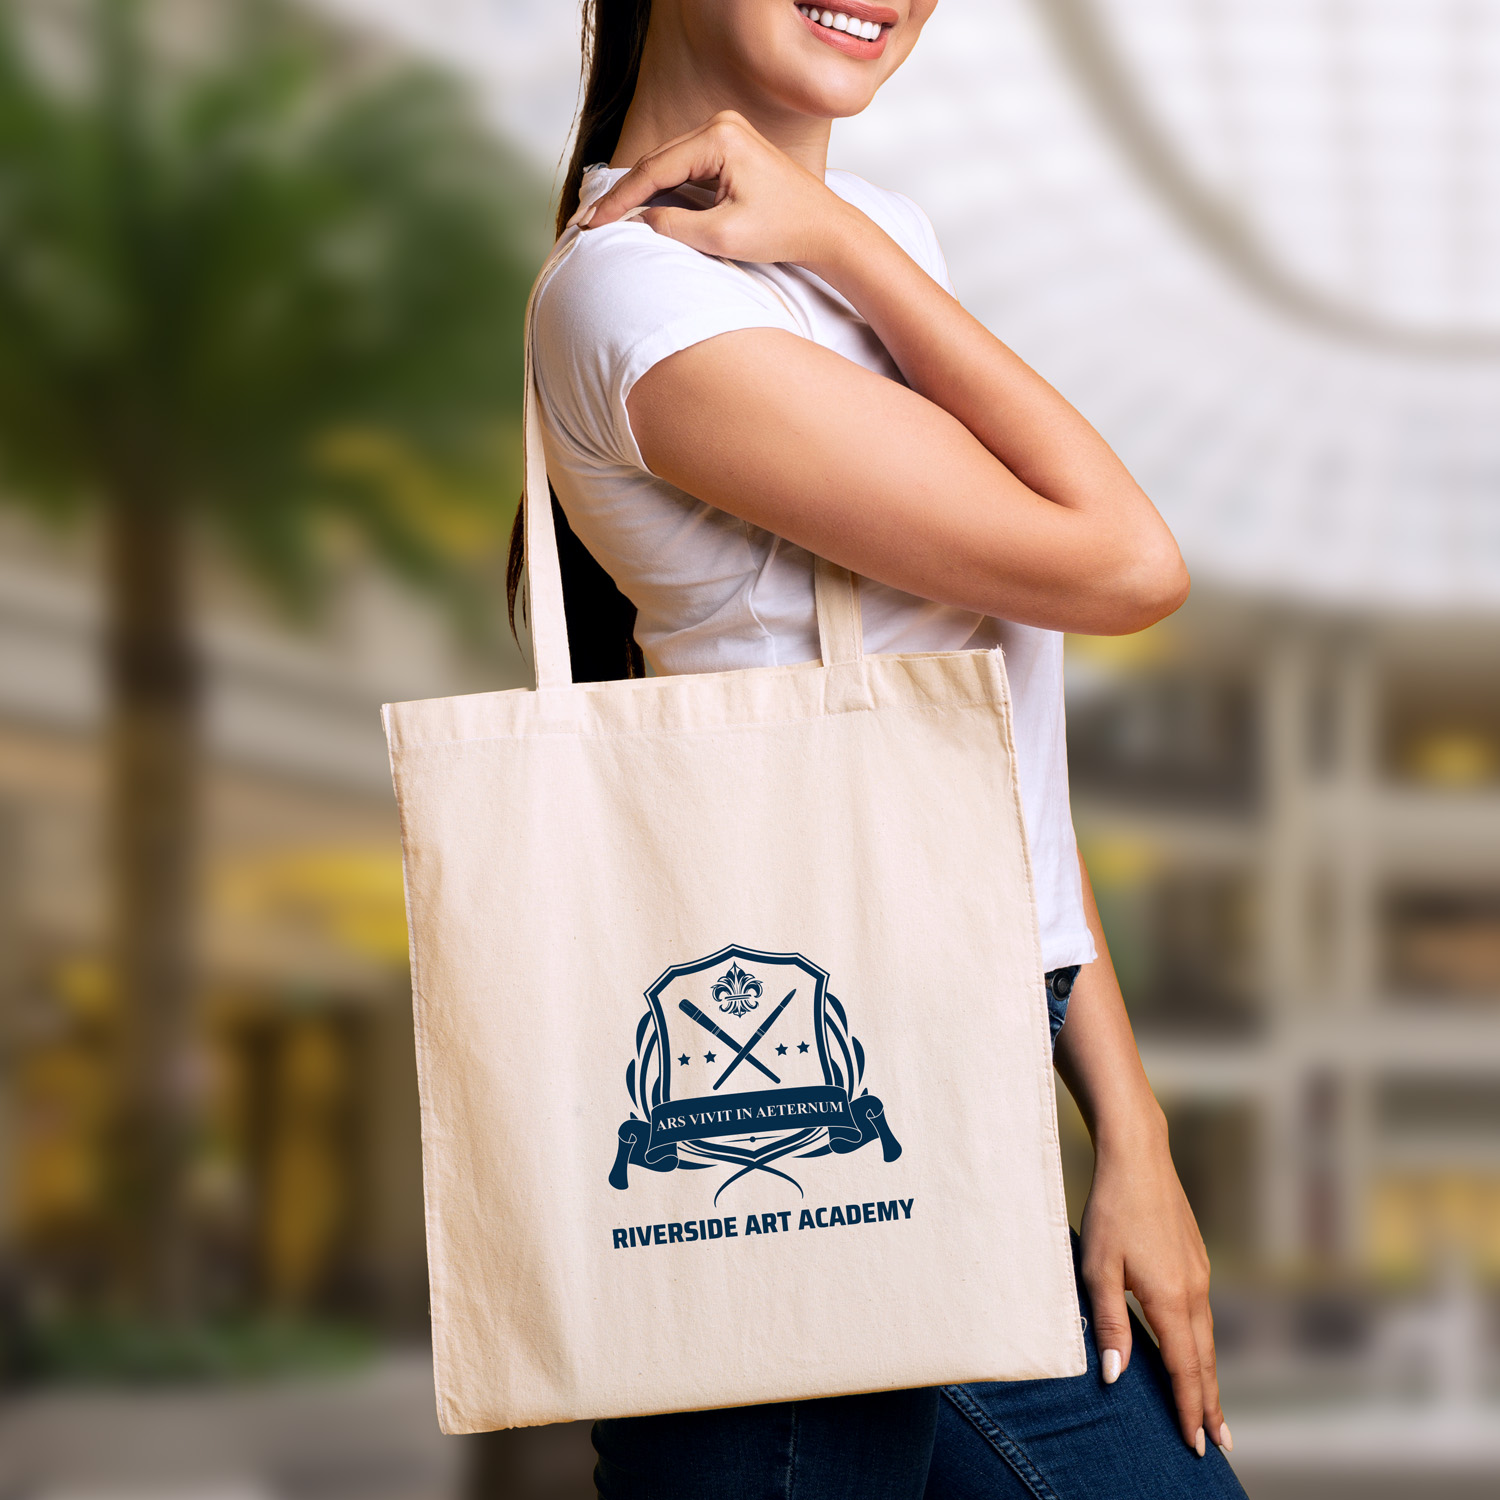 Cotton Tote Bag Features